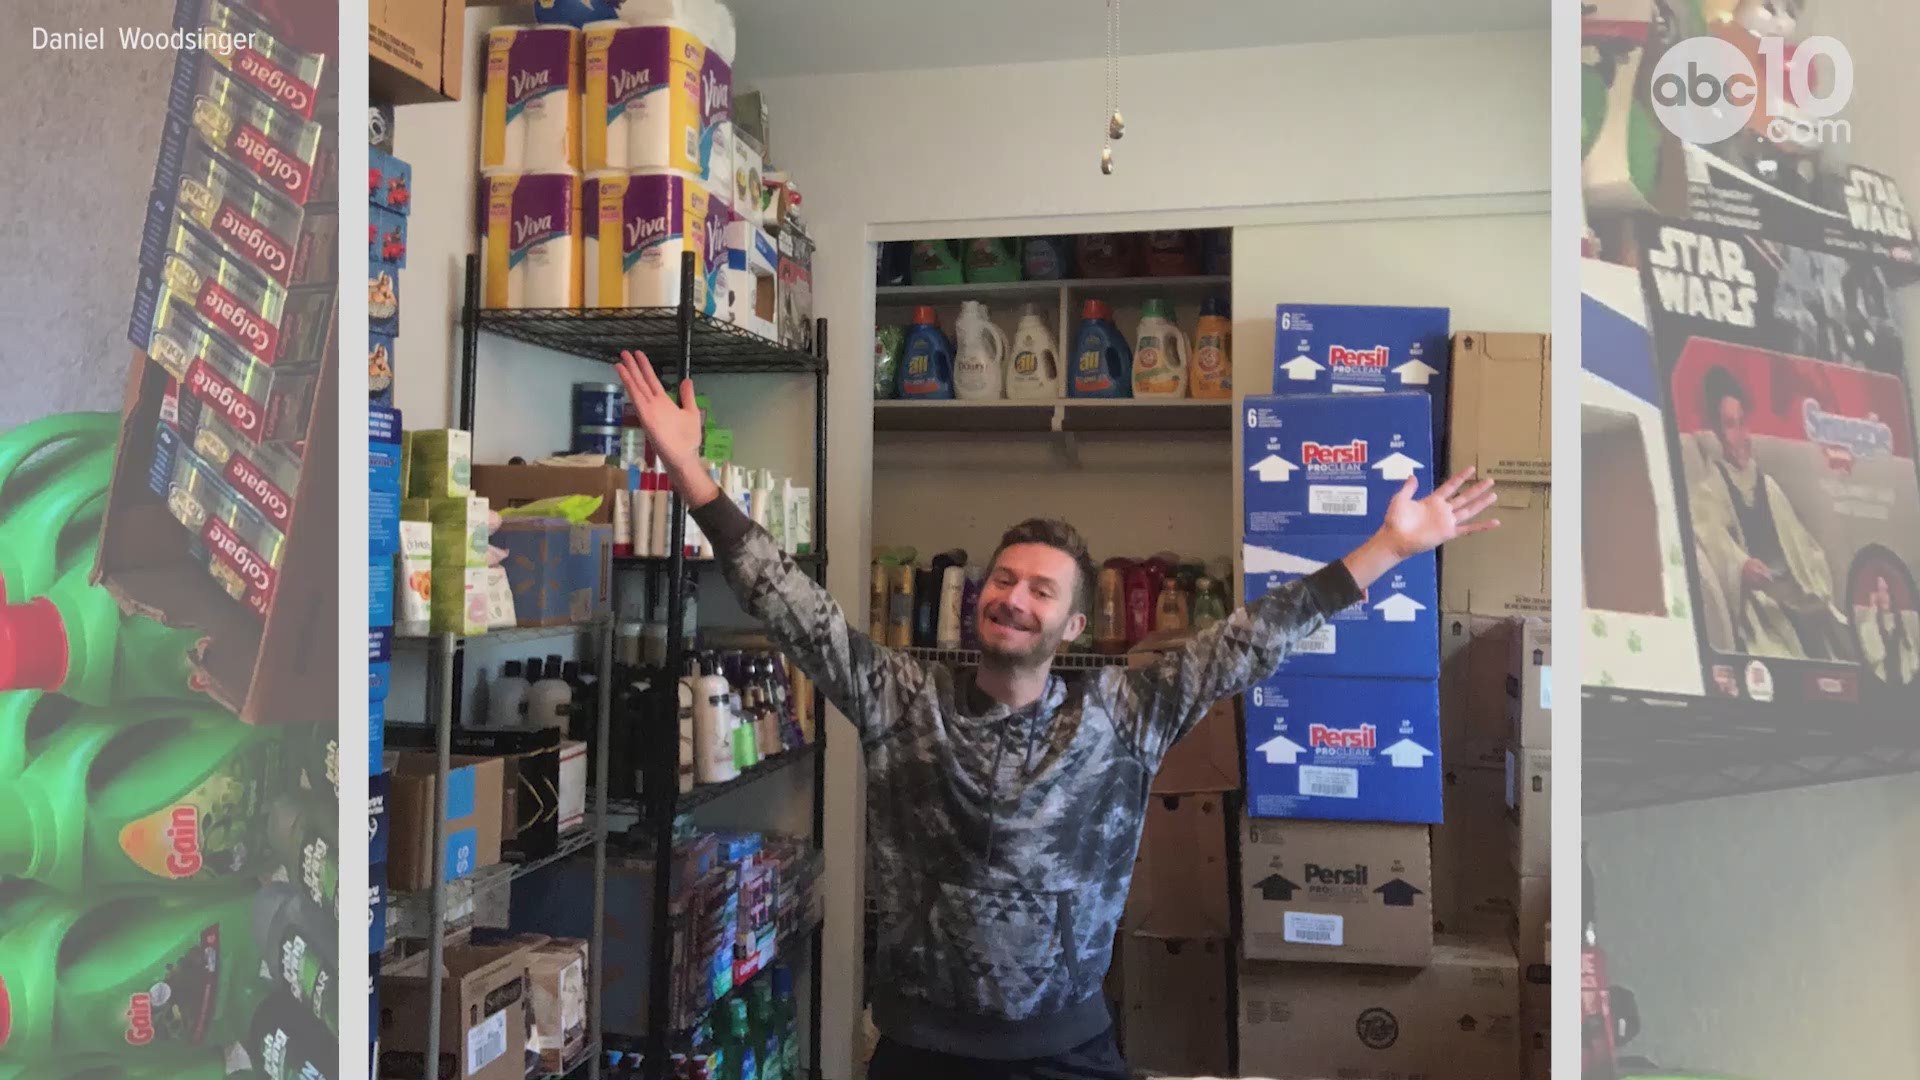 Blogger and couponing expert, Daniel Woodsinger is on a mission to save people money.